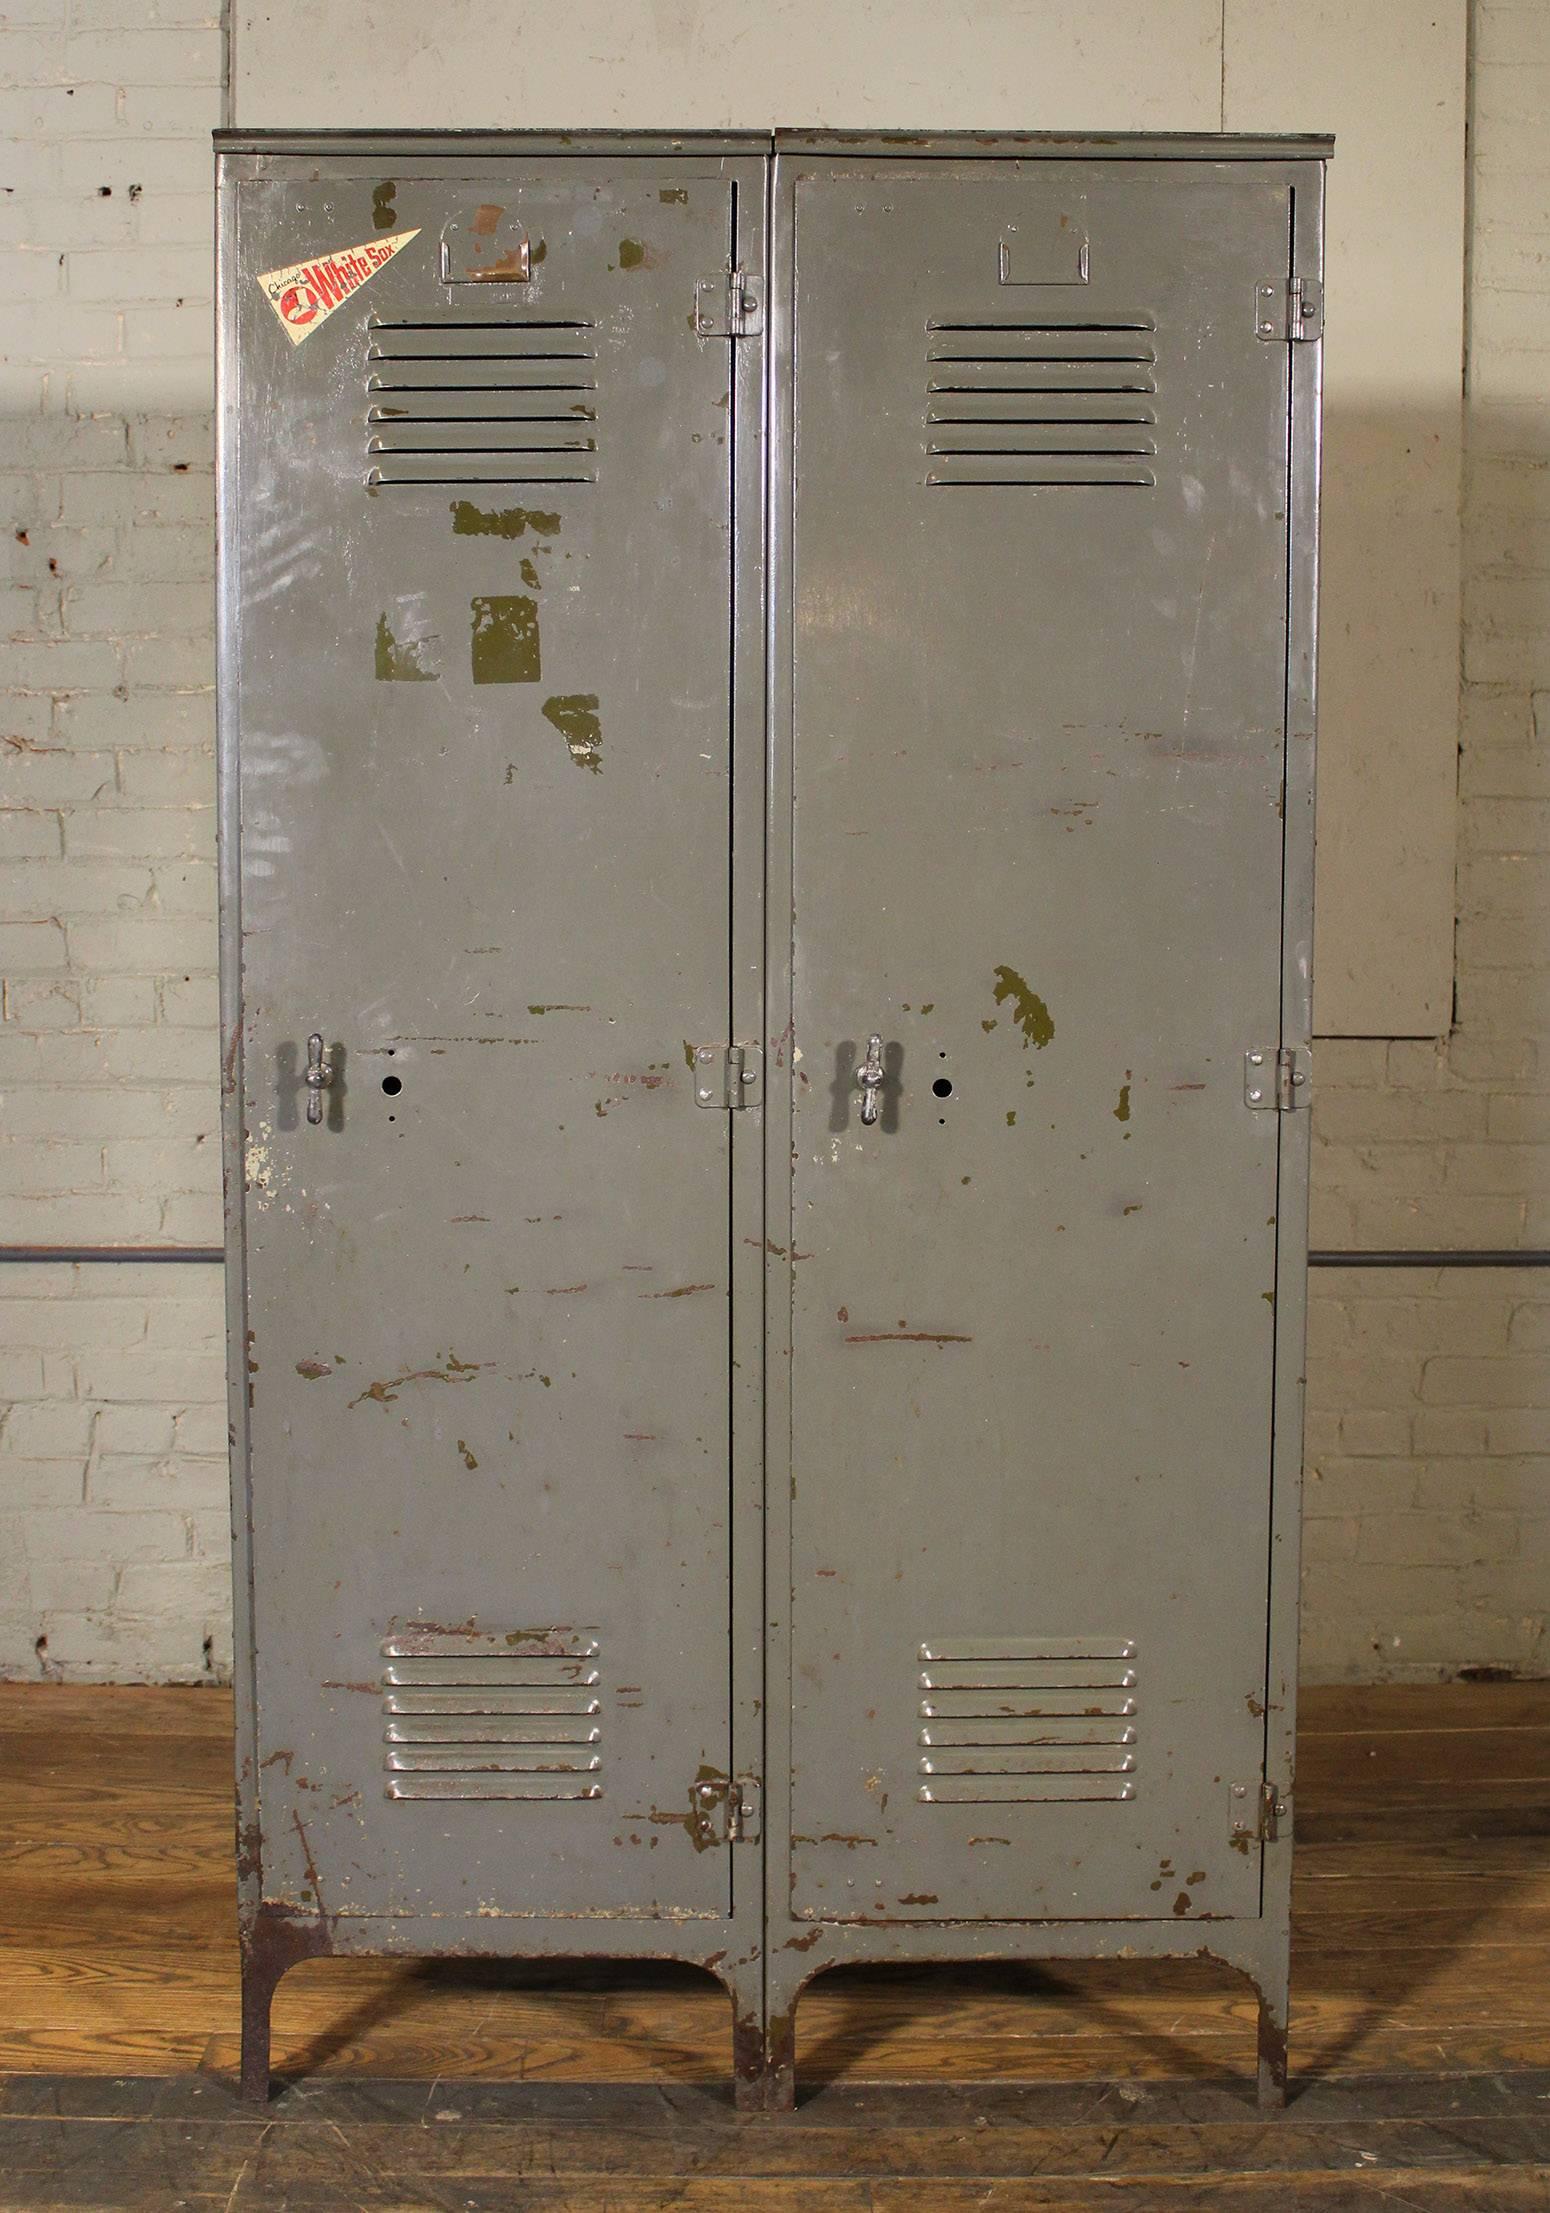 Vintage distressed set of oversized steel metal storage gym lockers. Old Chicago white Sox sticker on left locker. Overall dimensions measure 36 1/2" in width, 19" in depth and 66 3/4". Inside usable space in each locker measures 17